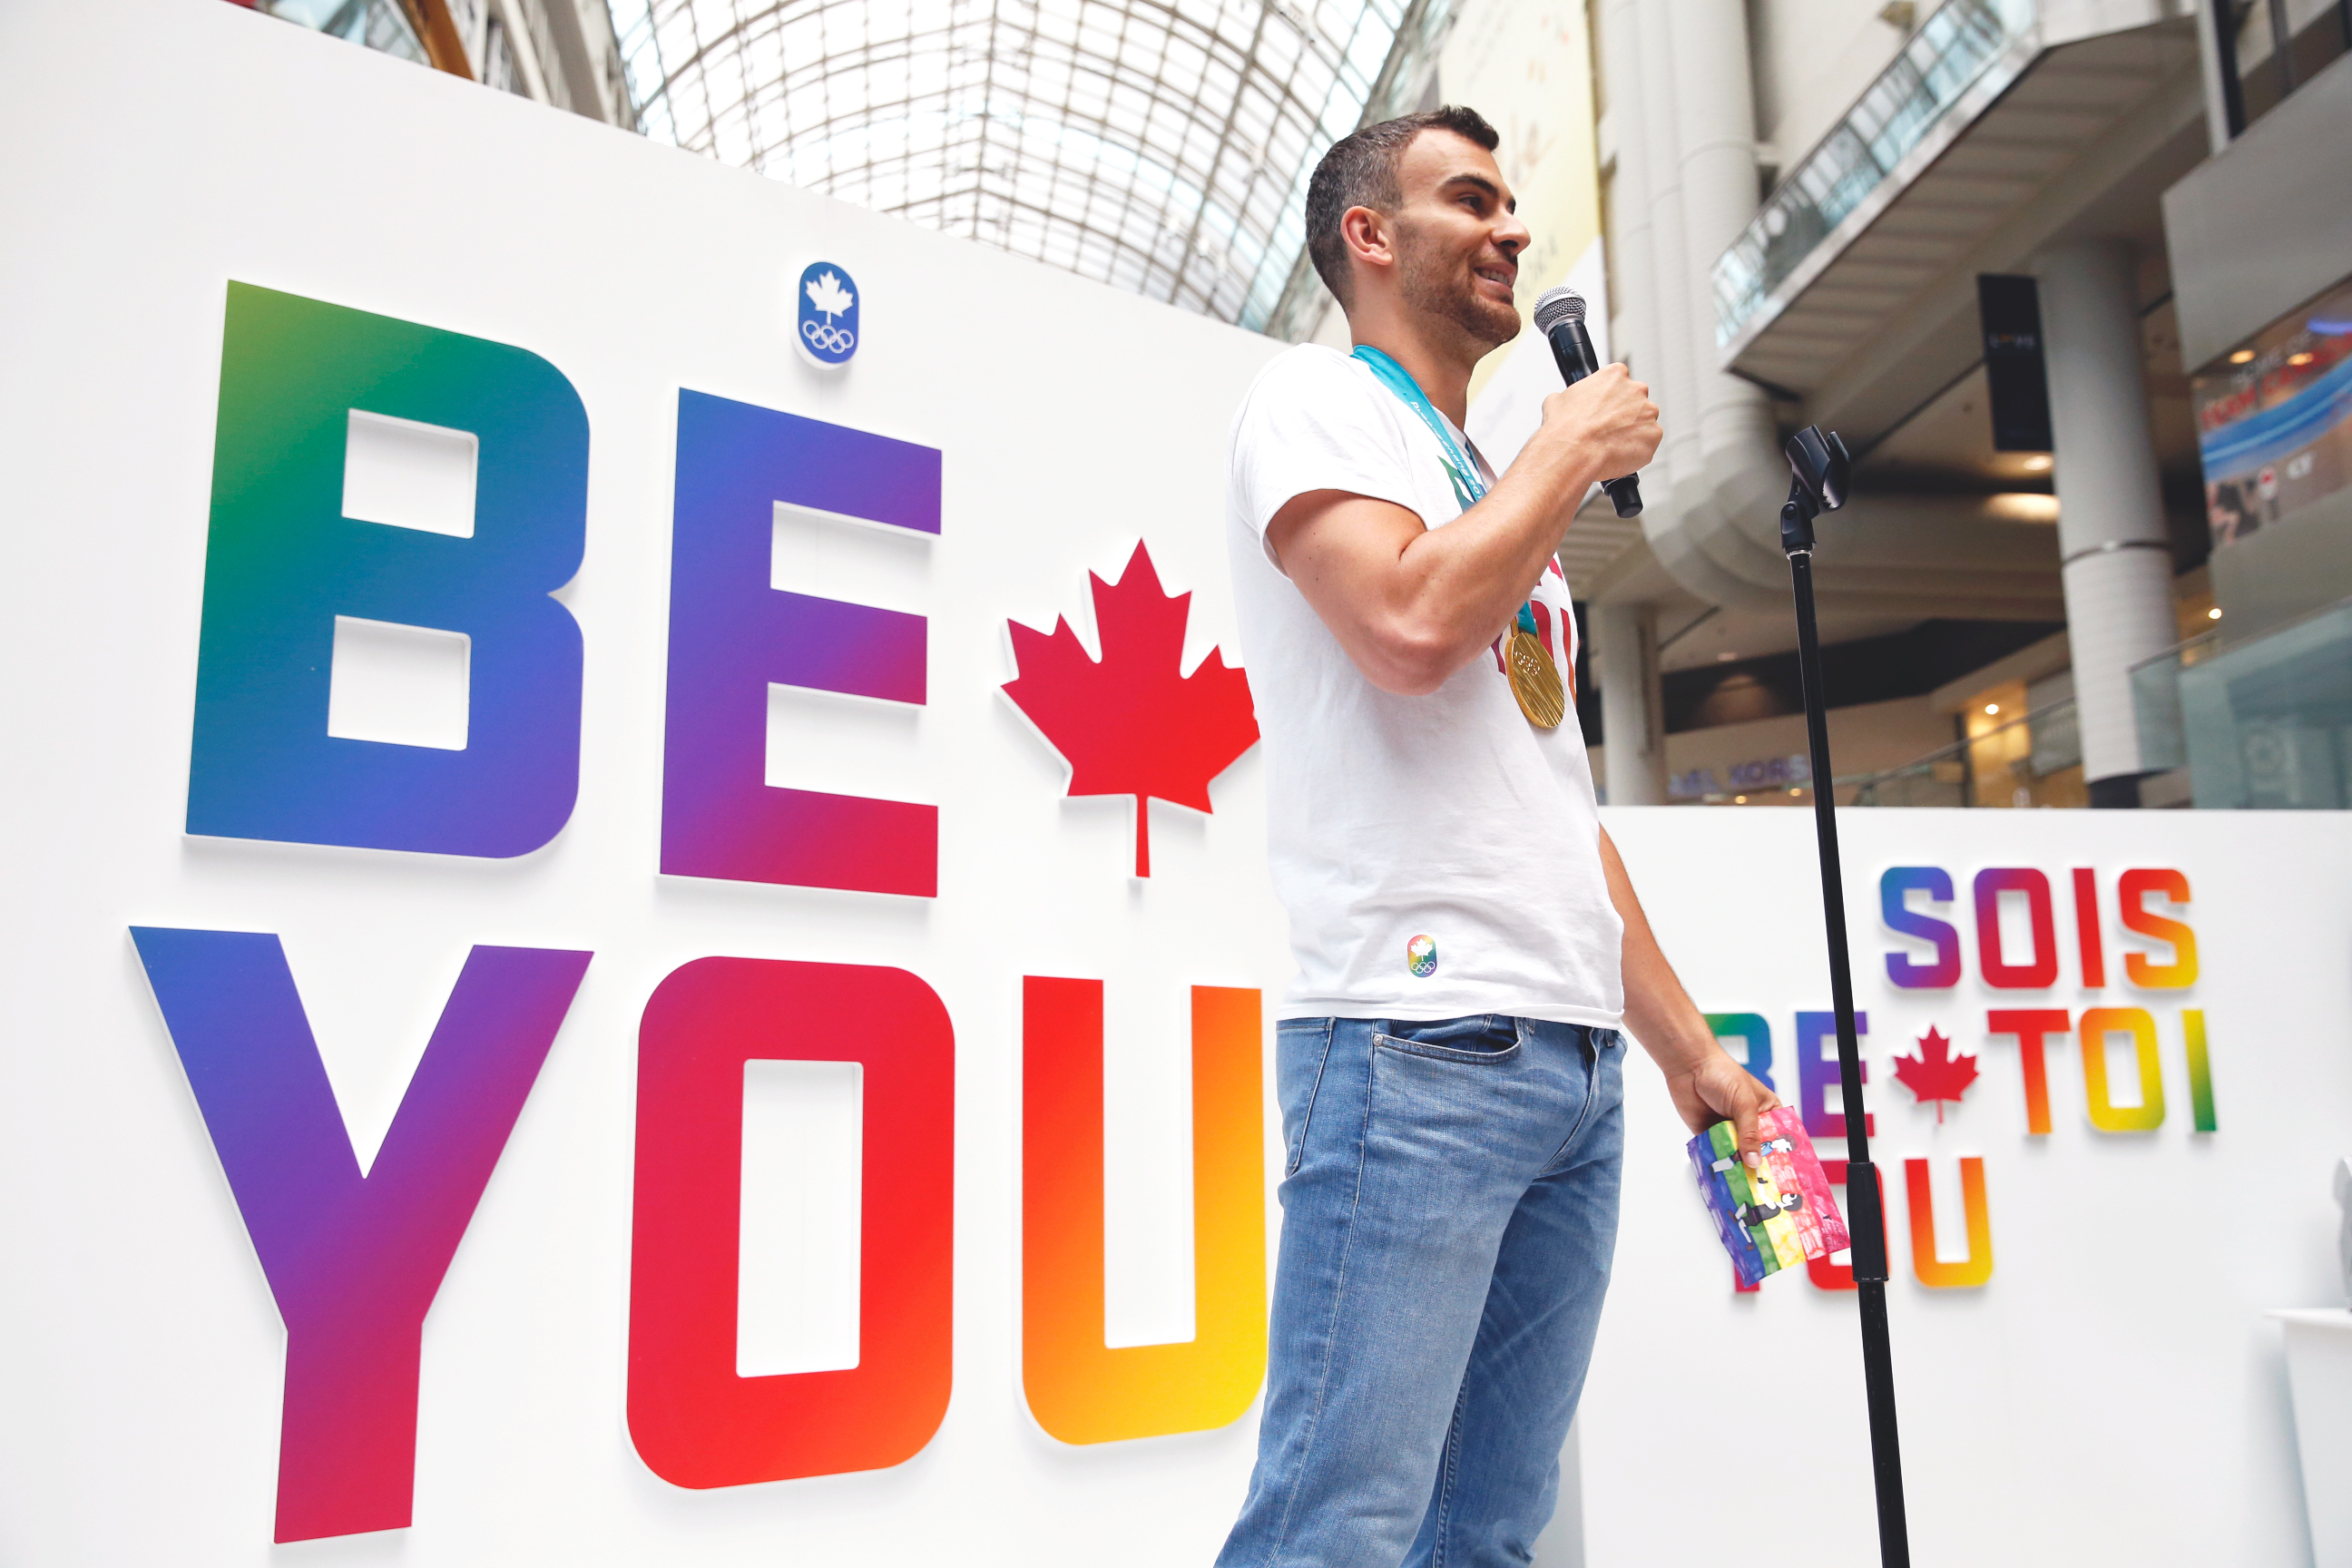 Eric Radford stands in front of Be You sign and speaks to the crowd.